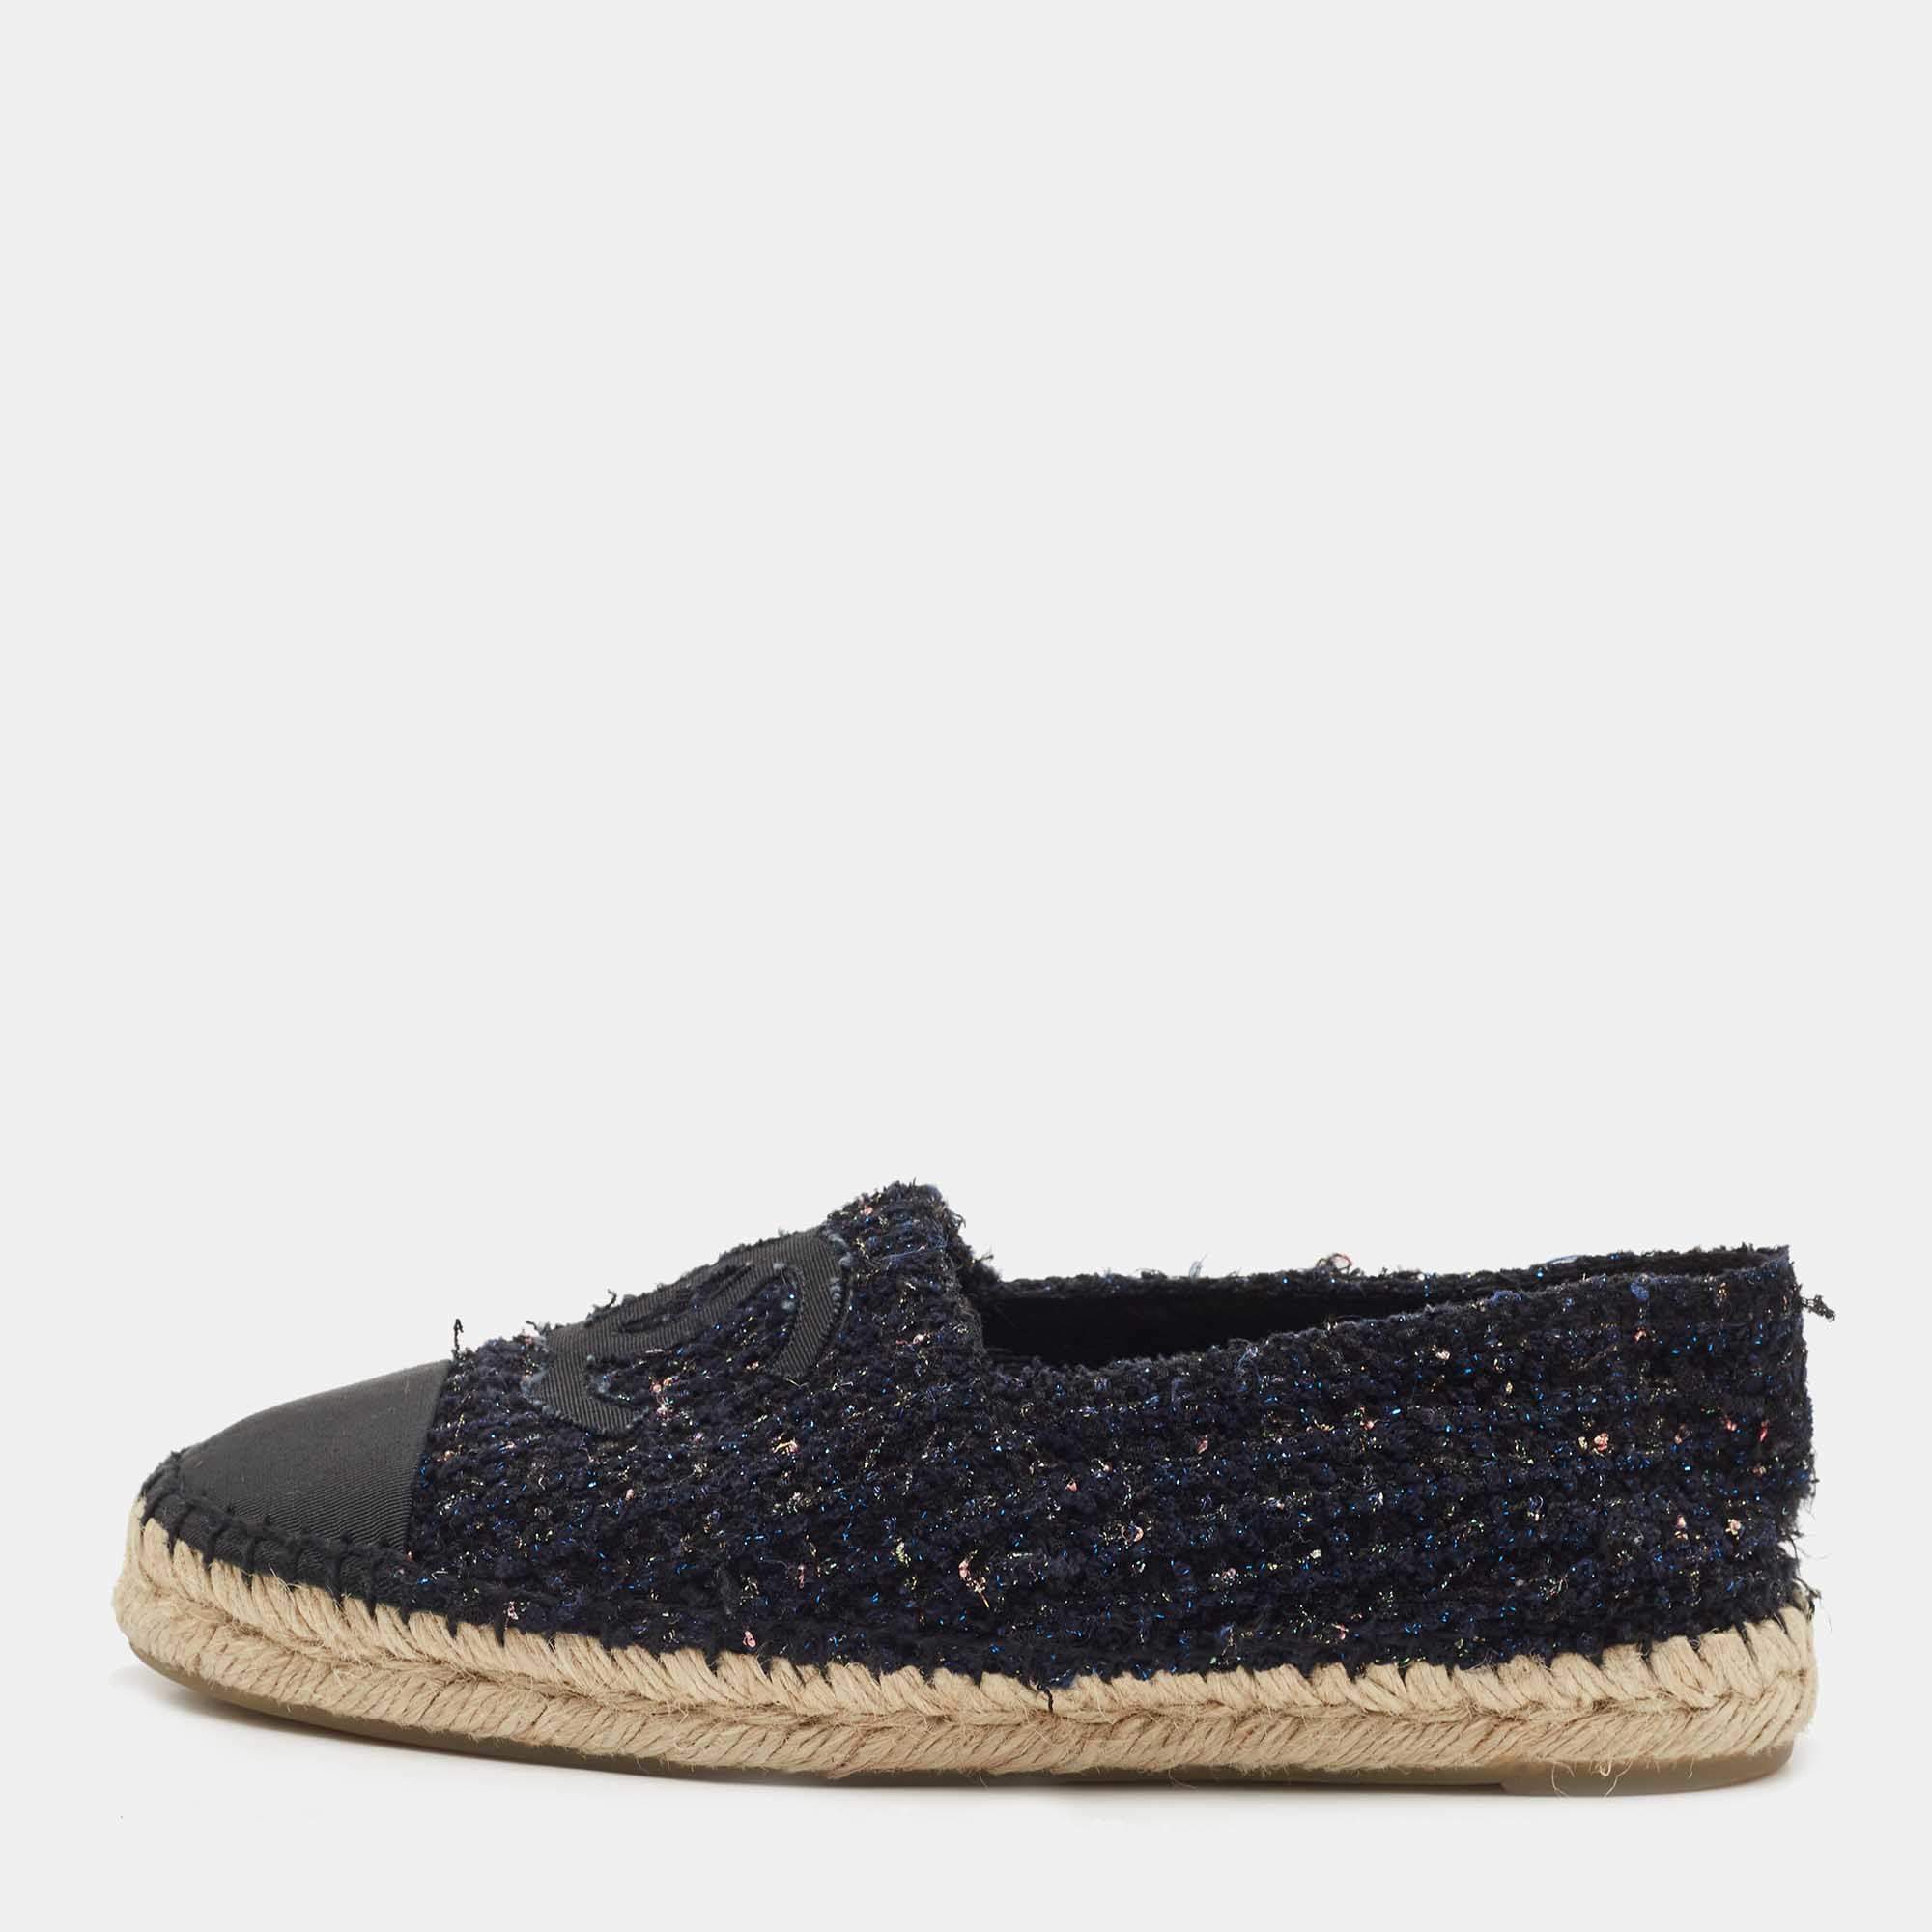 Chanel Navy Blue/Black Tweed and Canvas Cap Toe CC Espadrille Flats Size 37